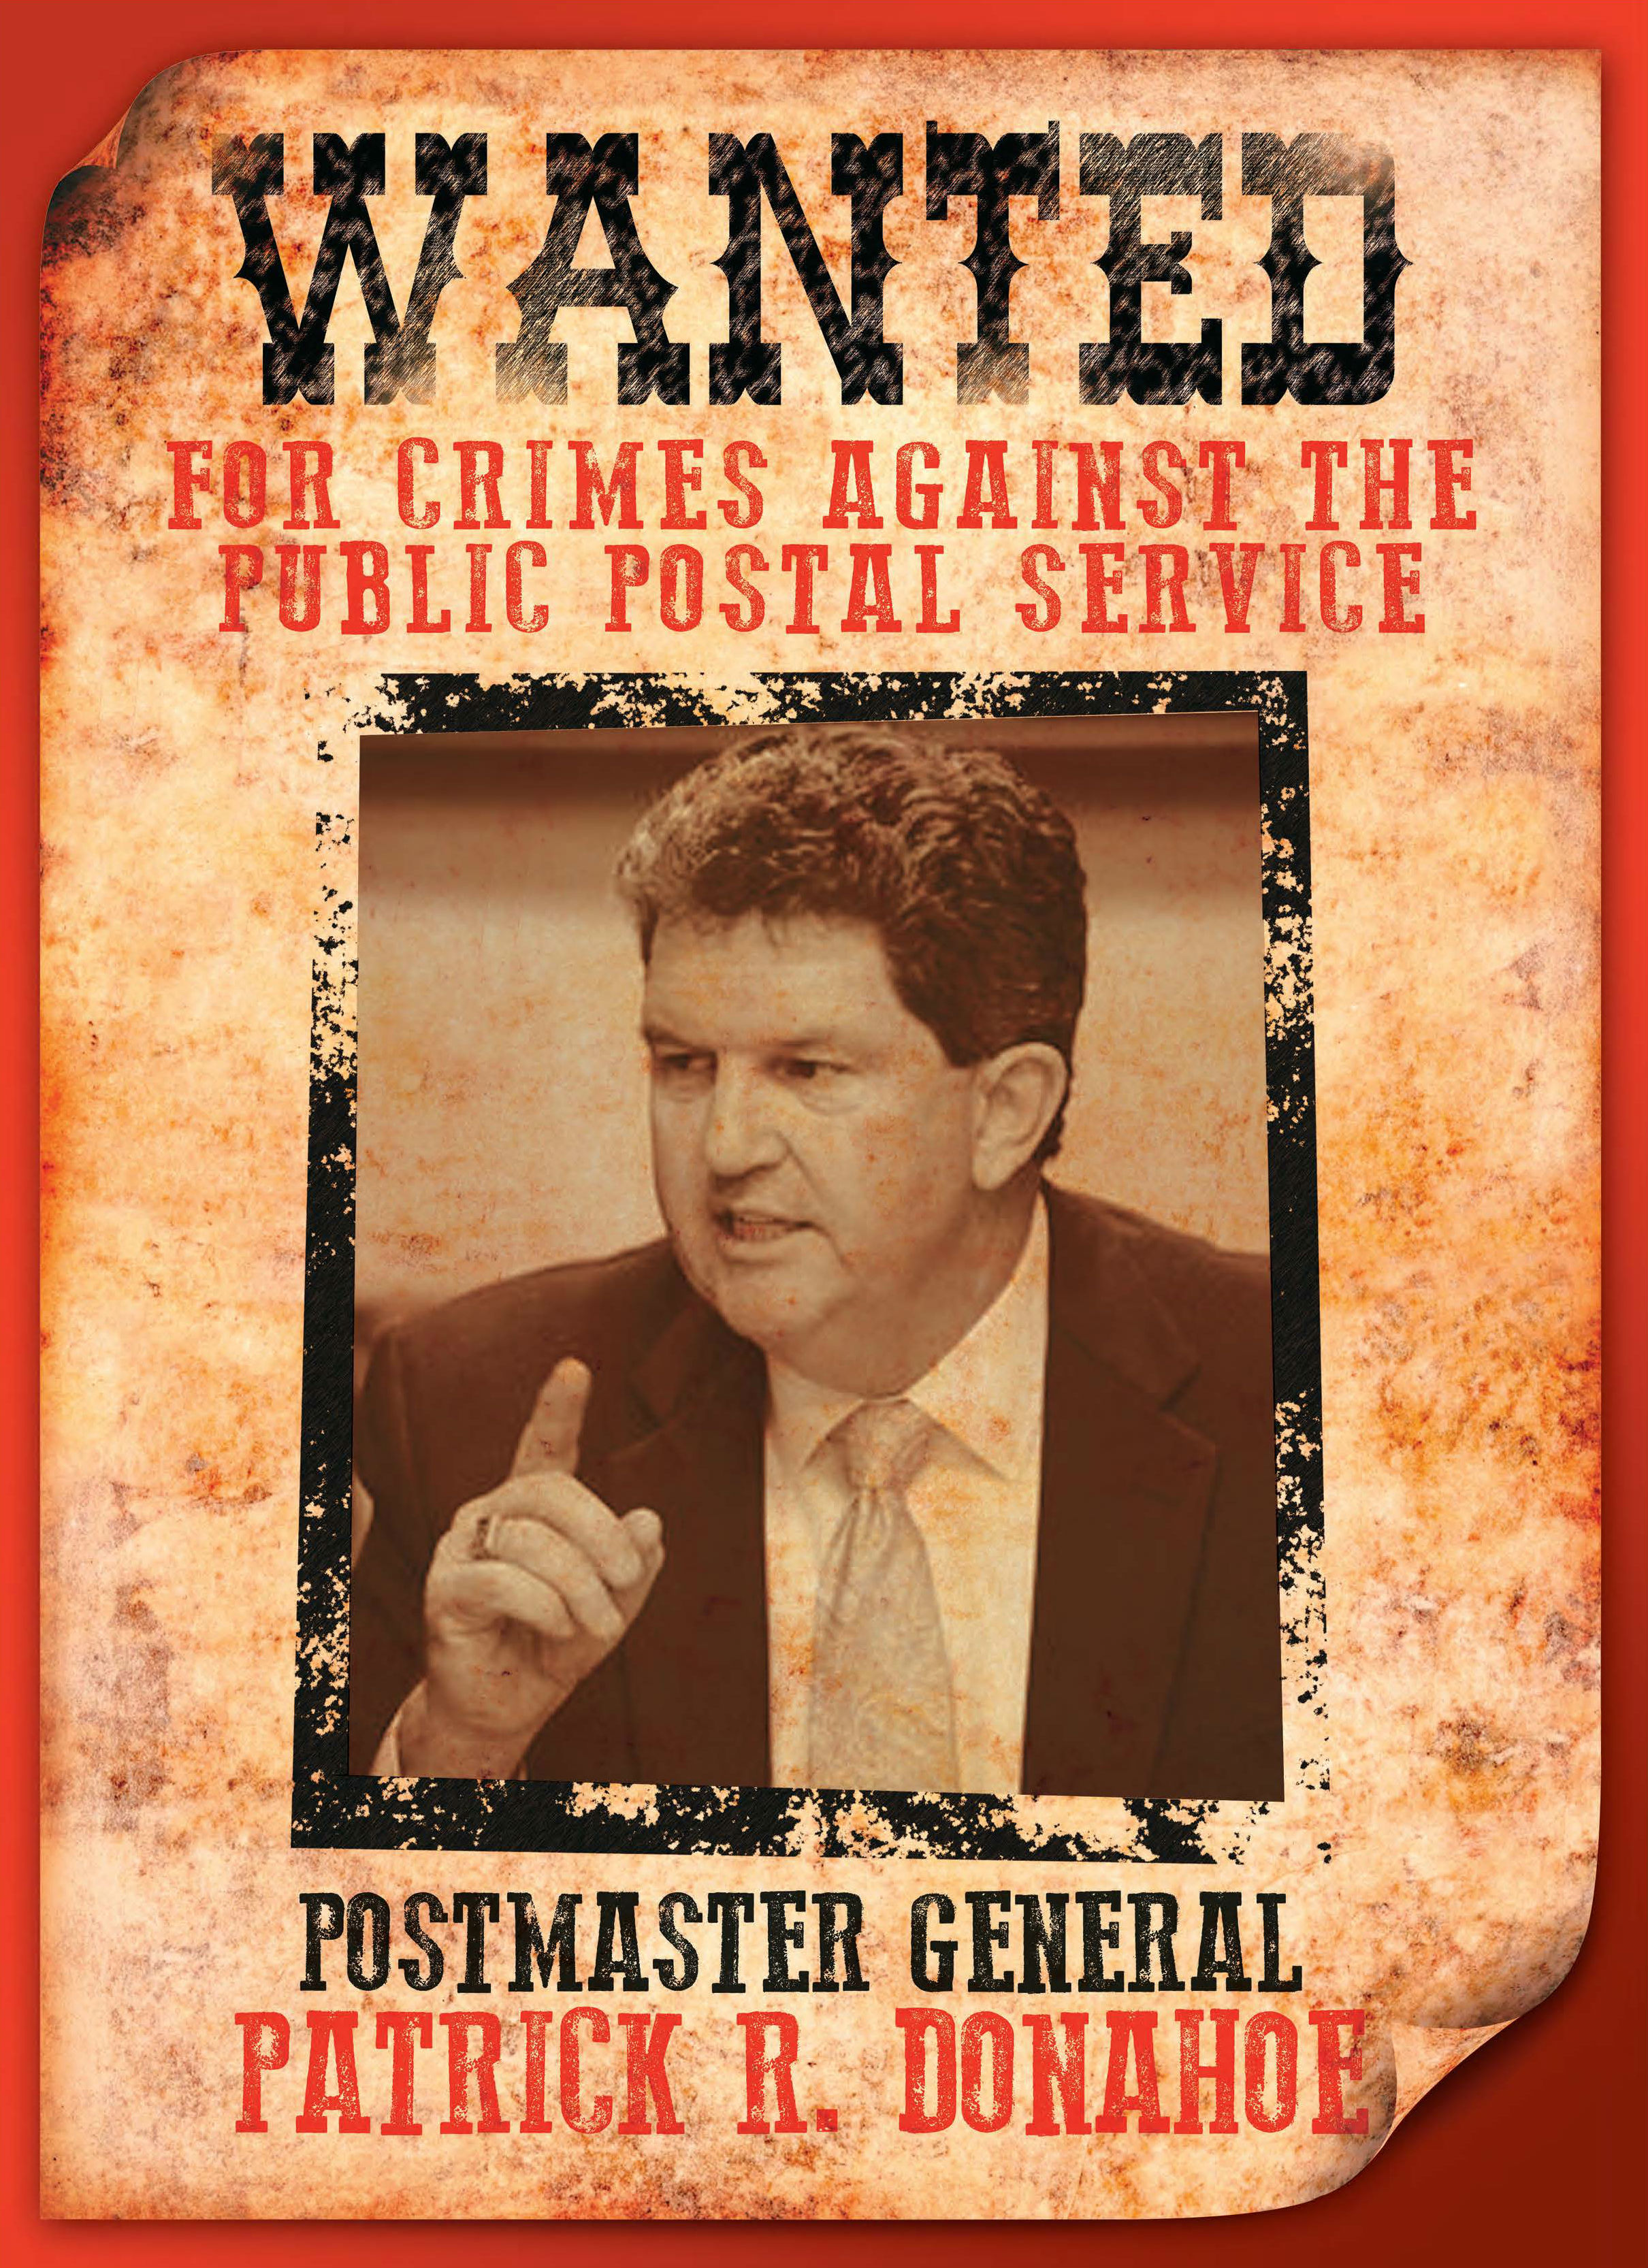 APWU It’s Okay to Post Pat Donahoe “Wanted” Poster